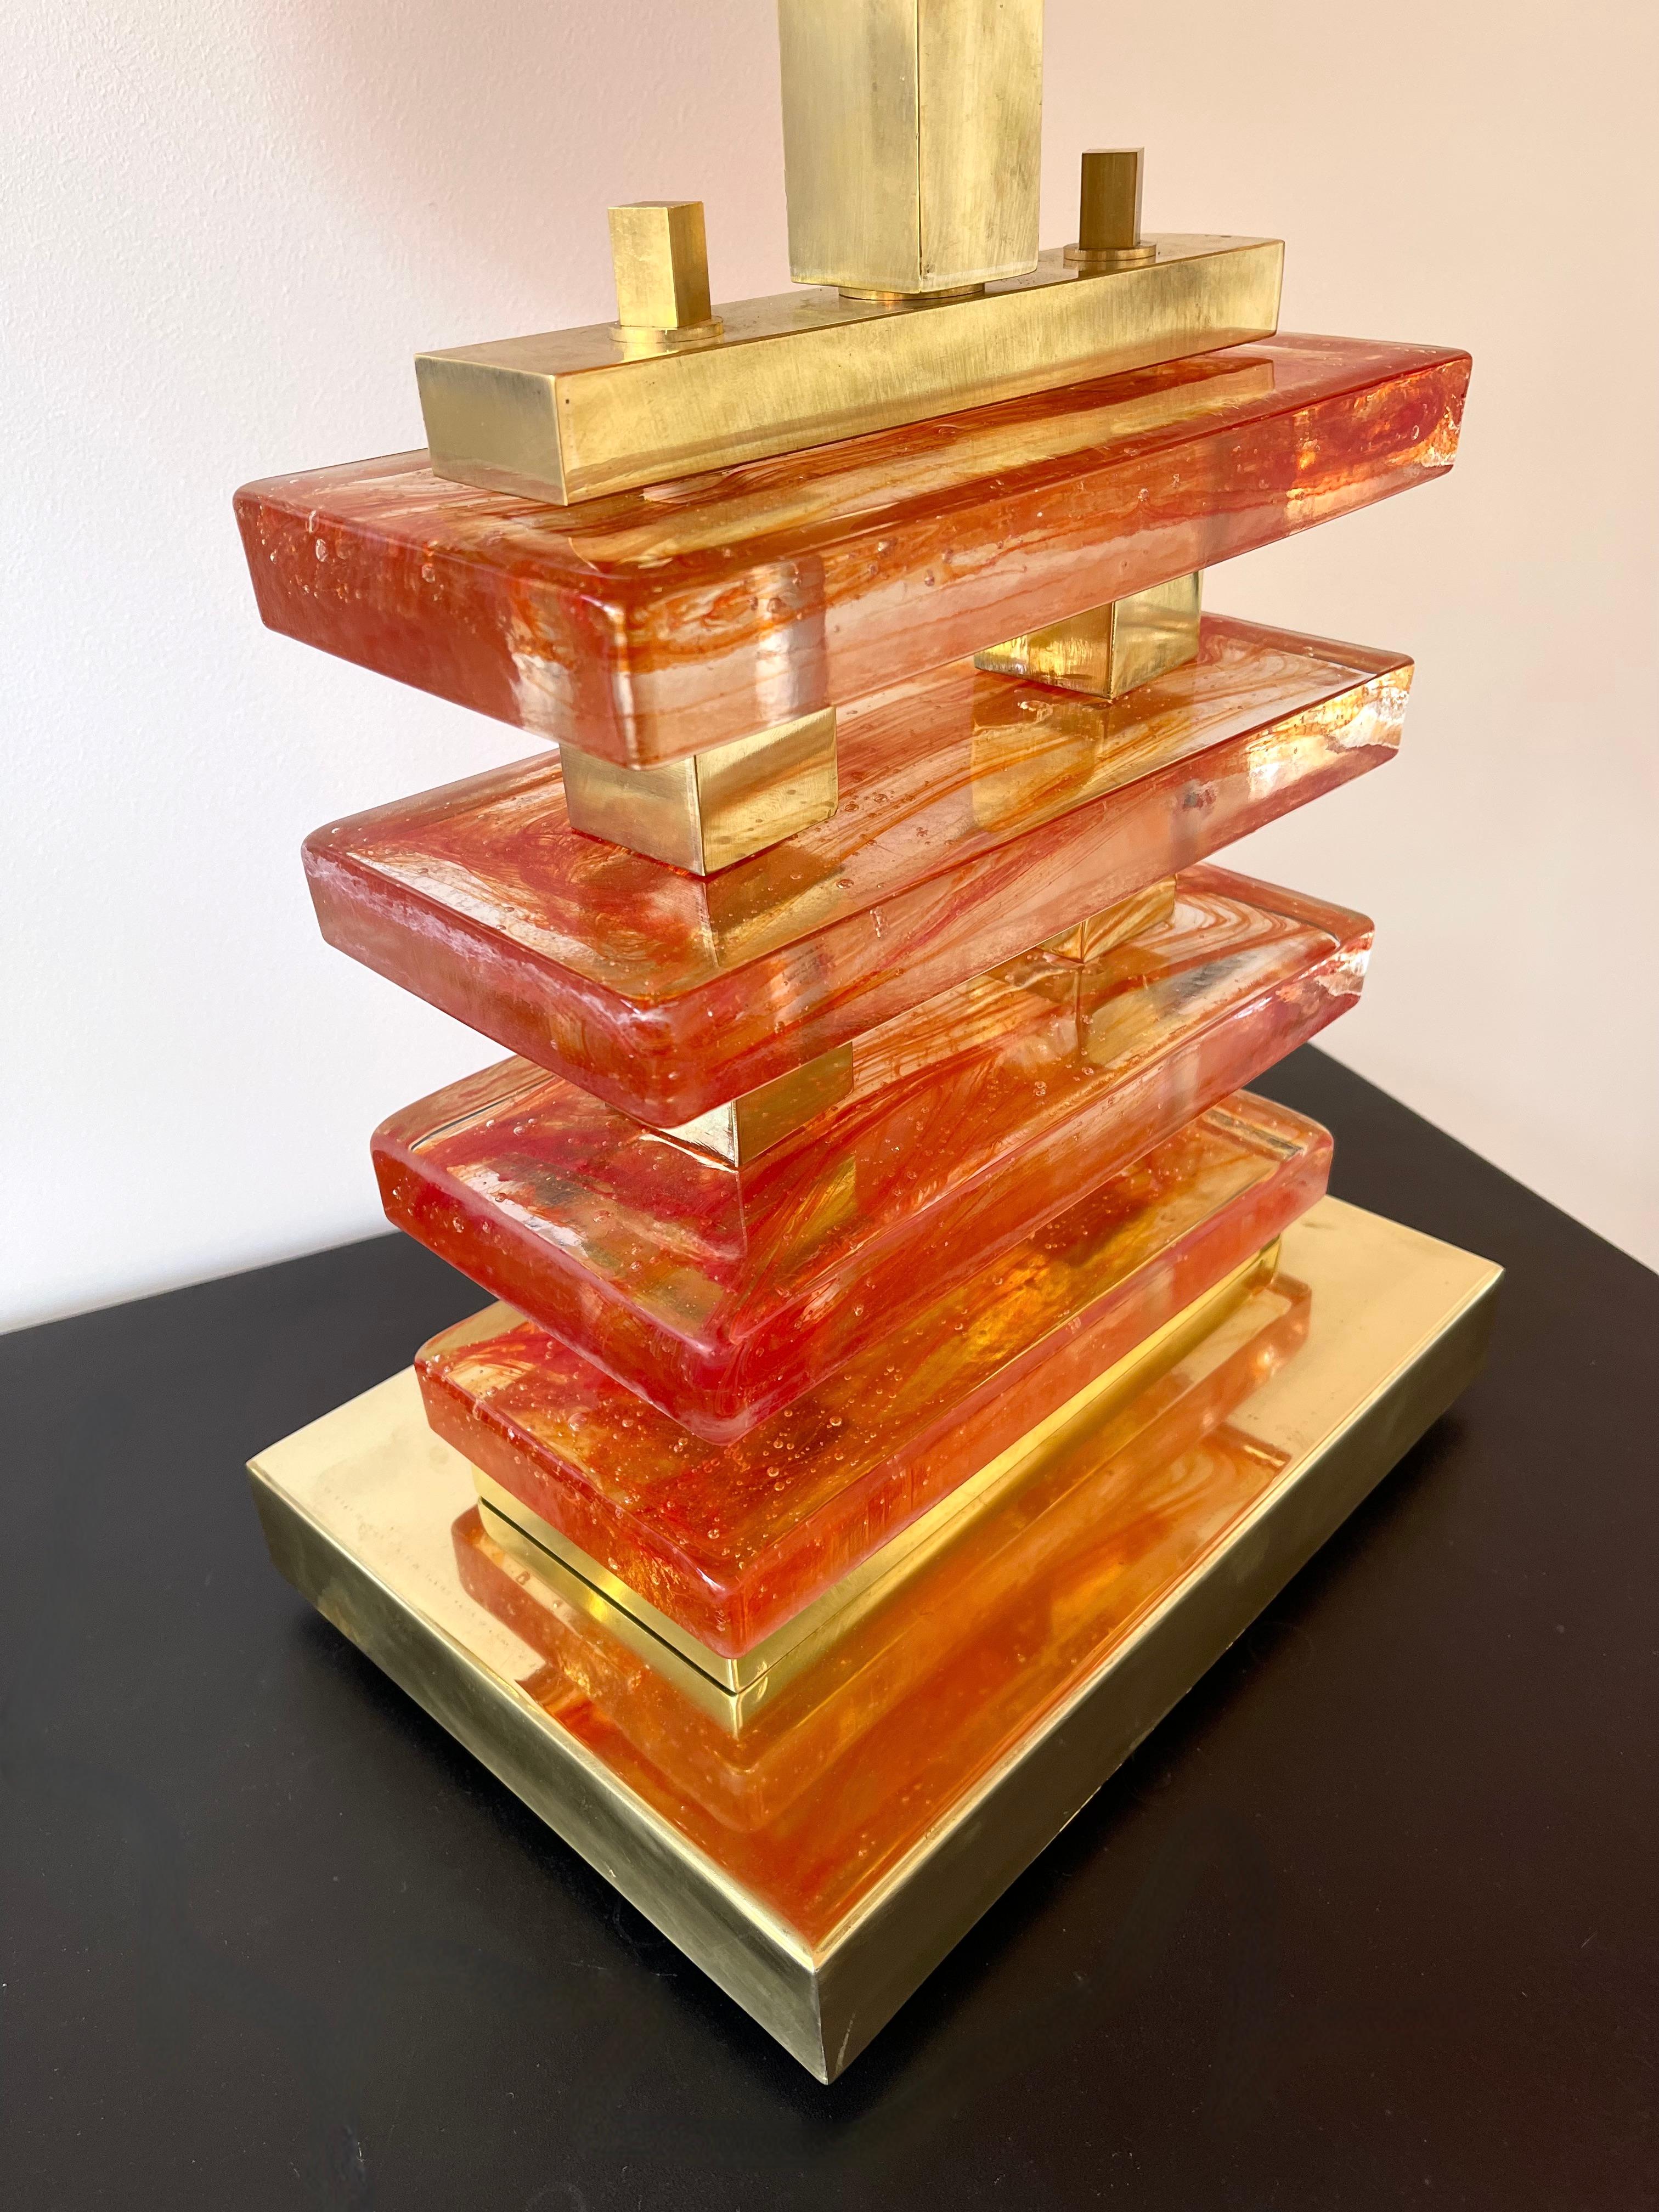 Pair of Murano glass red blade and brass table or bedside lamps. Contemporary work from a small artisanal italian design workshop. In the mood of Mid-Century Modern, Hollywood Regency, Venini, Mazzega, La Murrina, Veronese, Barovier, Fratelli Toso,